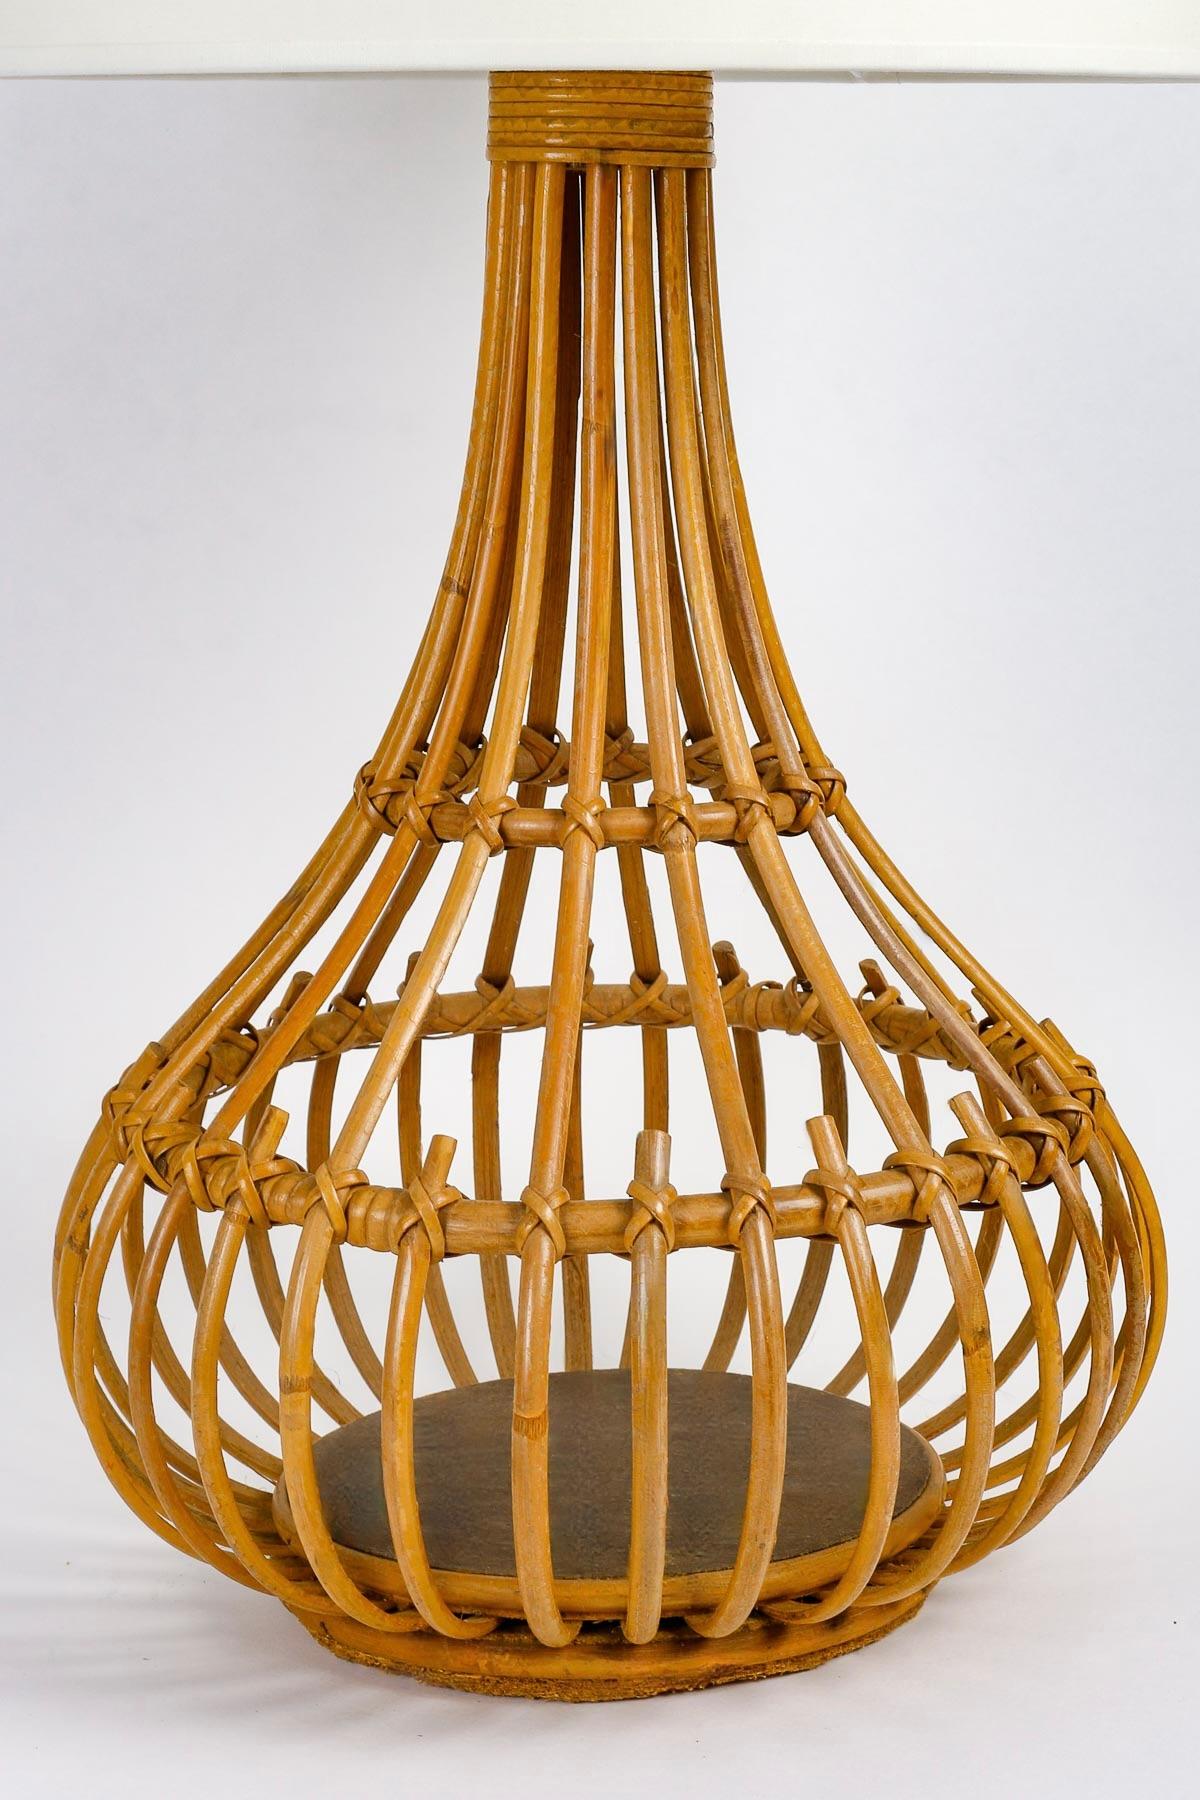 The lamp, in the shape of a necked vase, is composed of vertically placed bamboo stems held together by rattan circles of different sizes placed horizontally at different heights, joined by rattan wires.
The ensemble rests on a round wooden base set